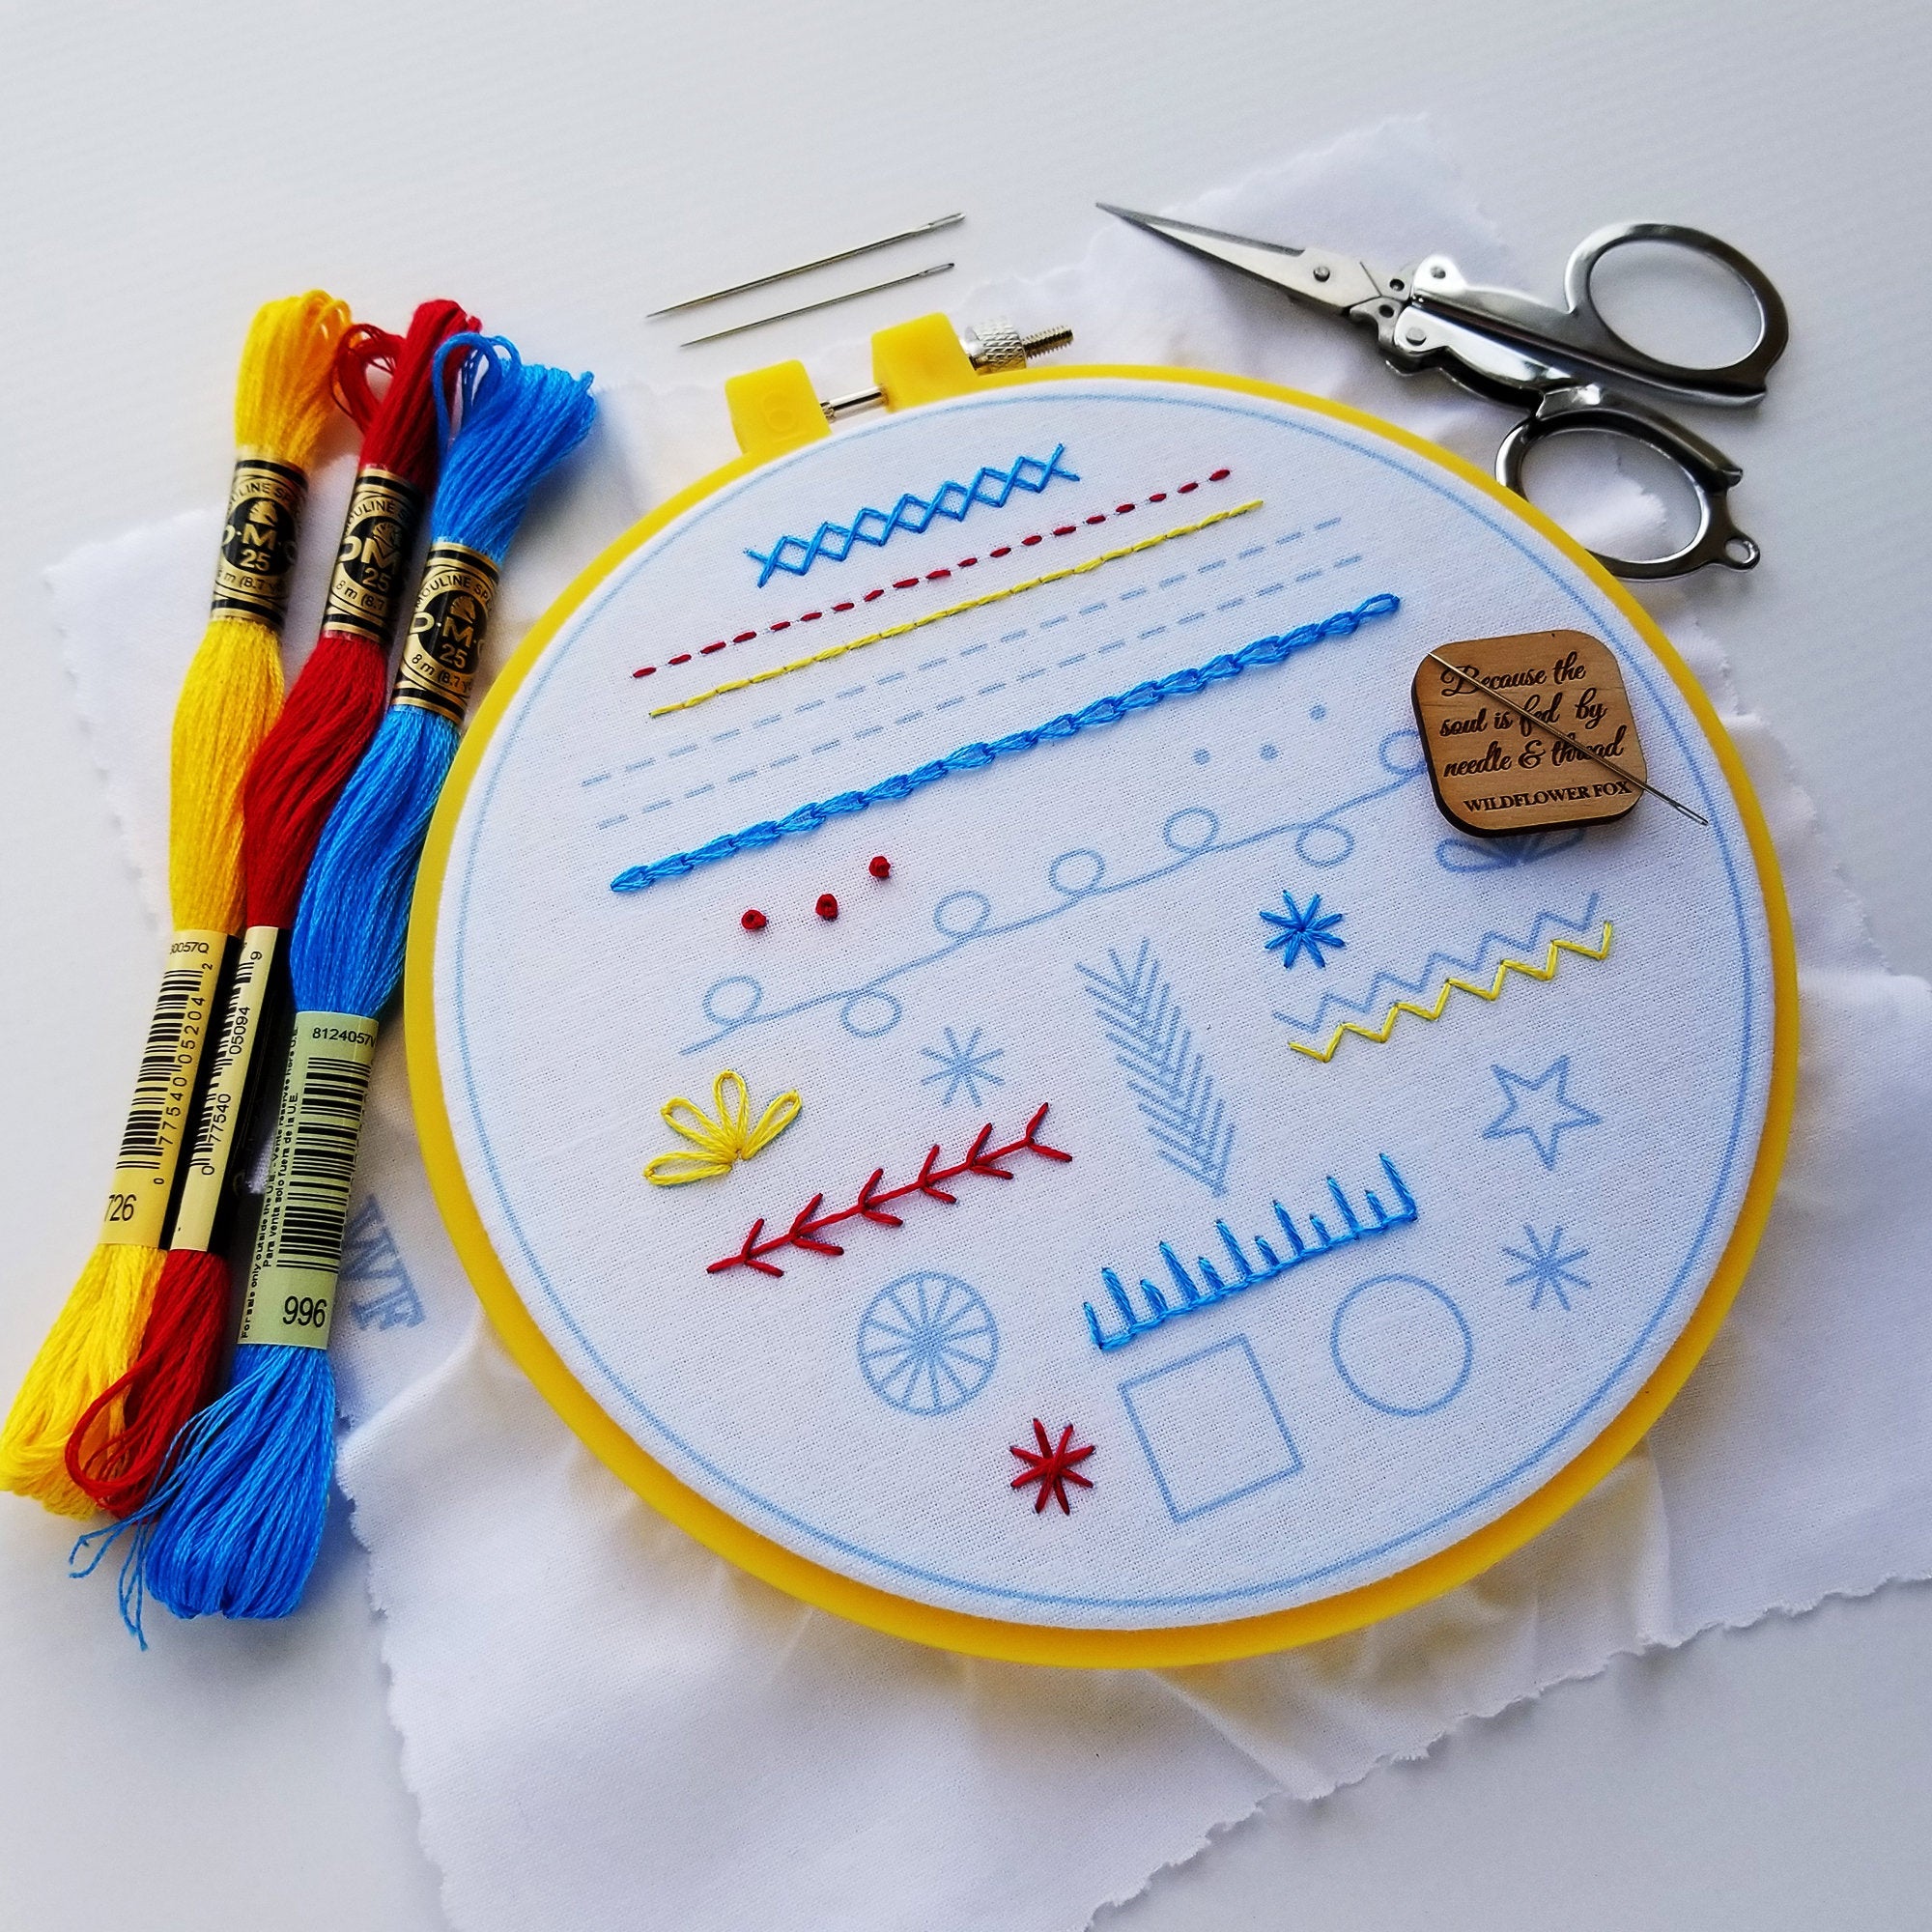 Beginners Hand Embroidery Starter Kit with Stitch Sampler Pattern Printed Fabric and Step by Step Instructional Guide